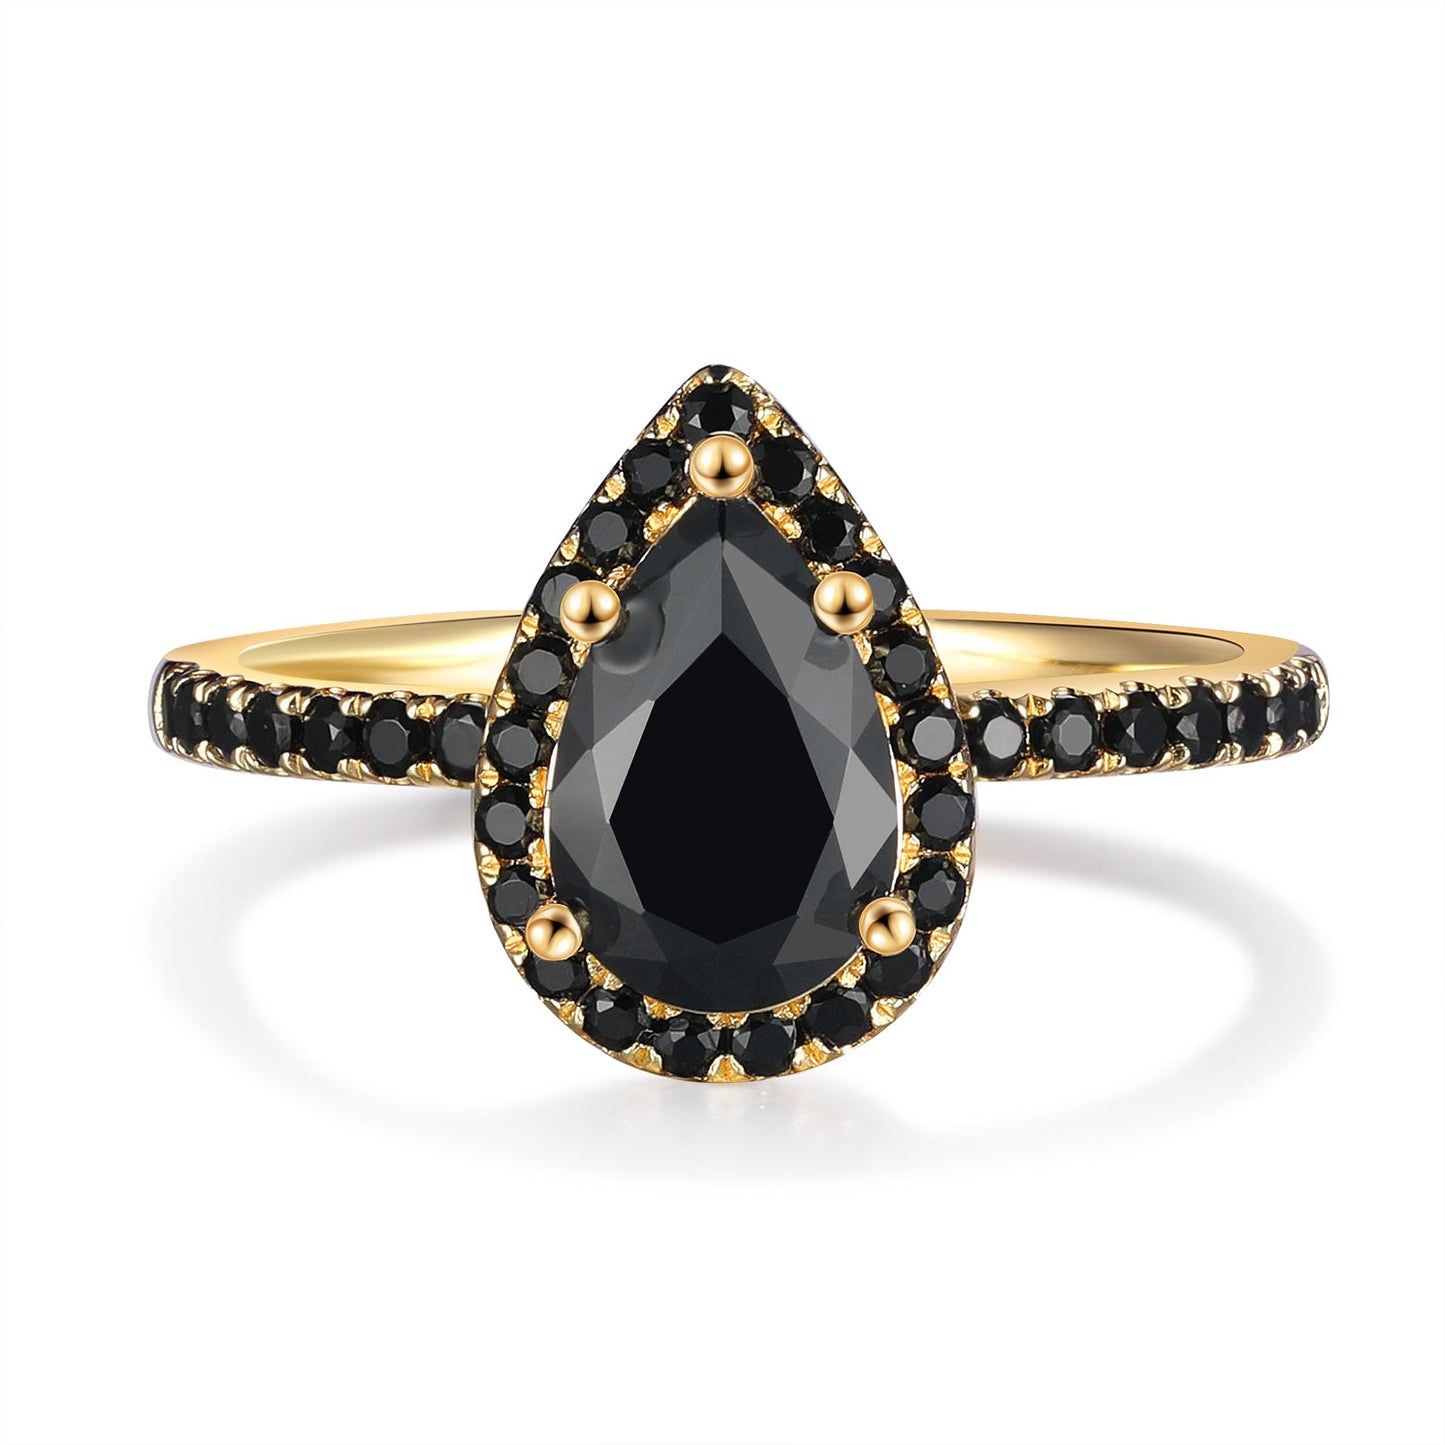 ThinkEngraved Womens Wedding Rings 4 Women's Gold Promise Ring With a 1.33ct Pear Cut Black Onyx Stone